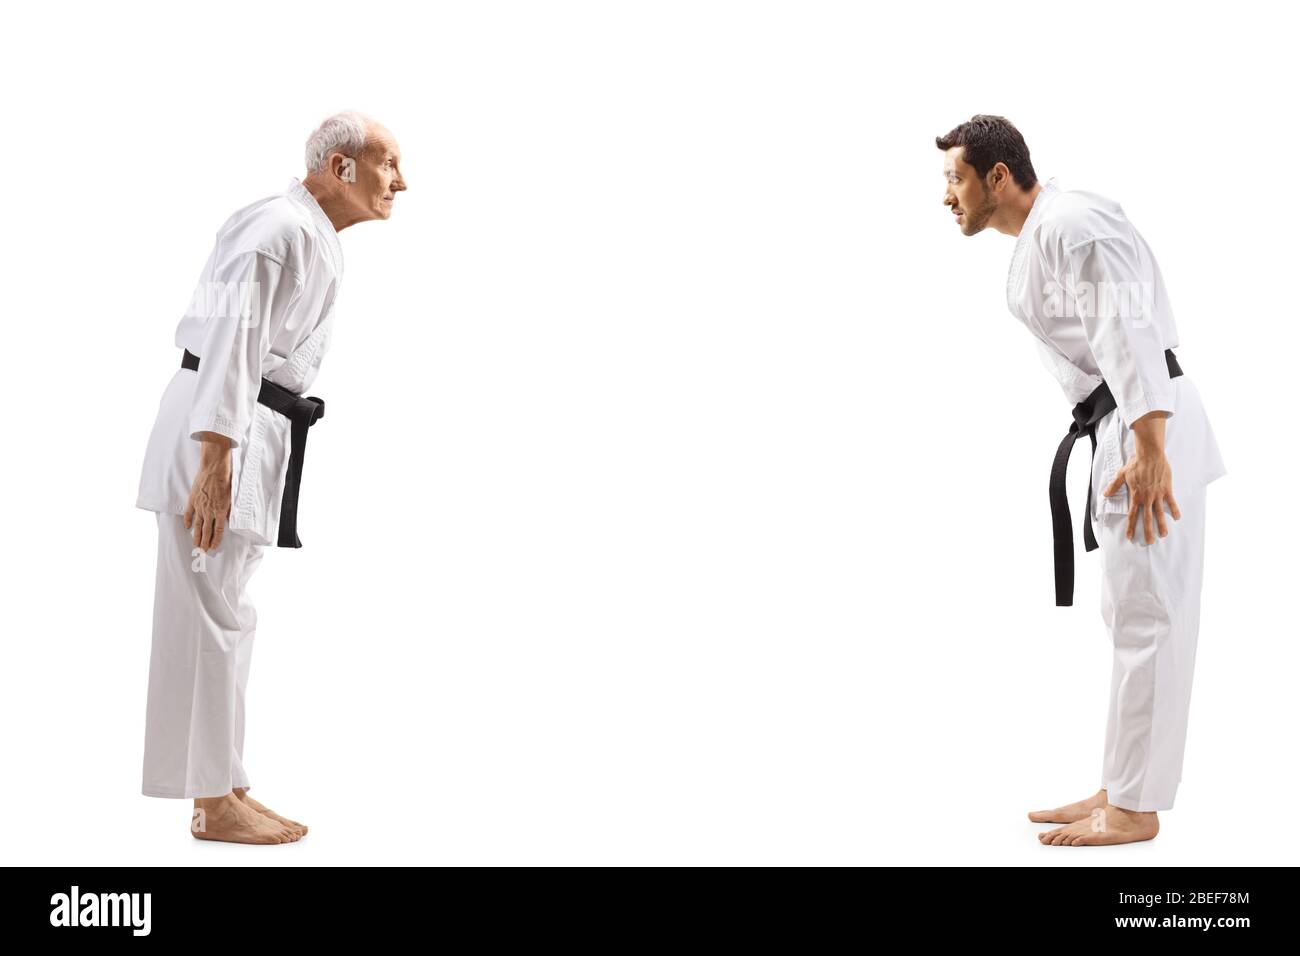 Full length profile shot of young man and elderly man in karate kimonos bowing isolated on white background Stock Photo